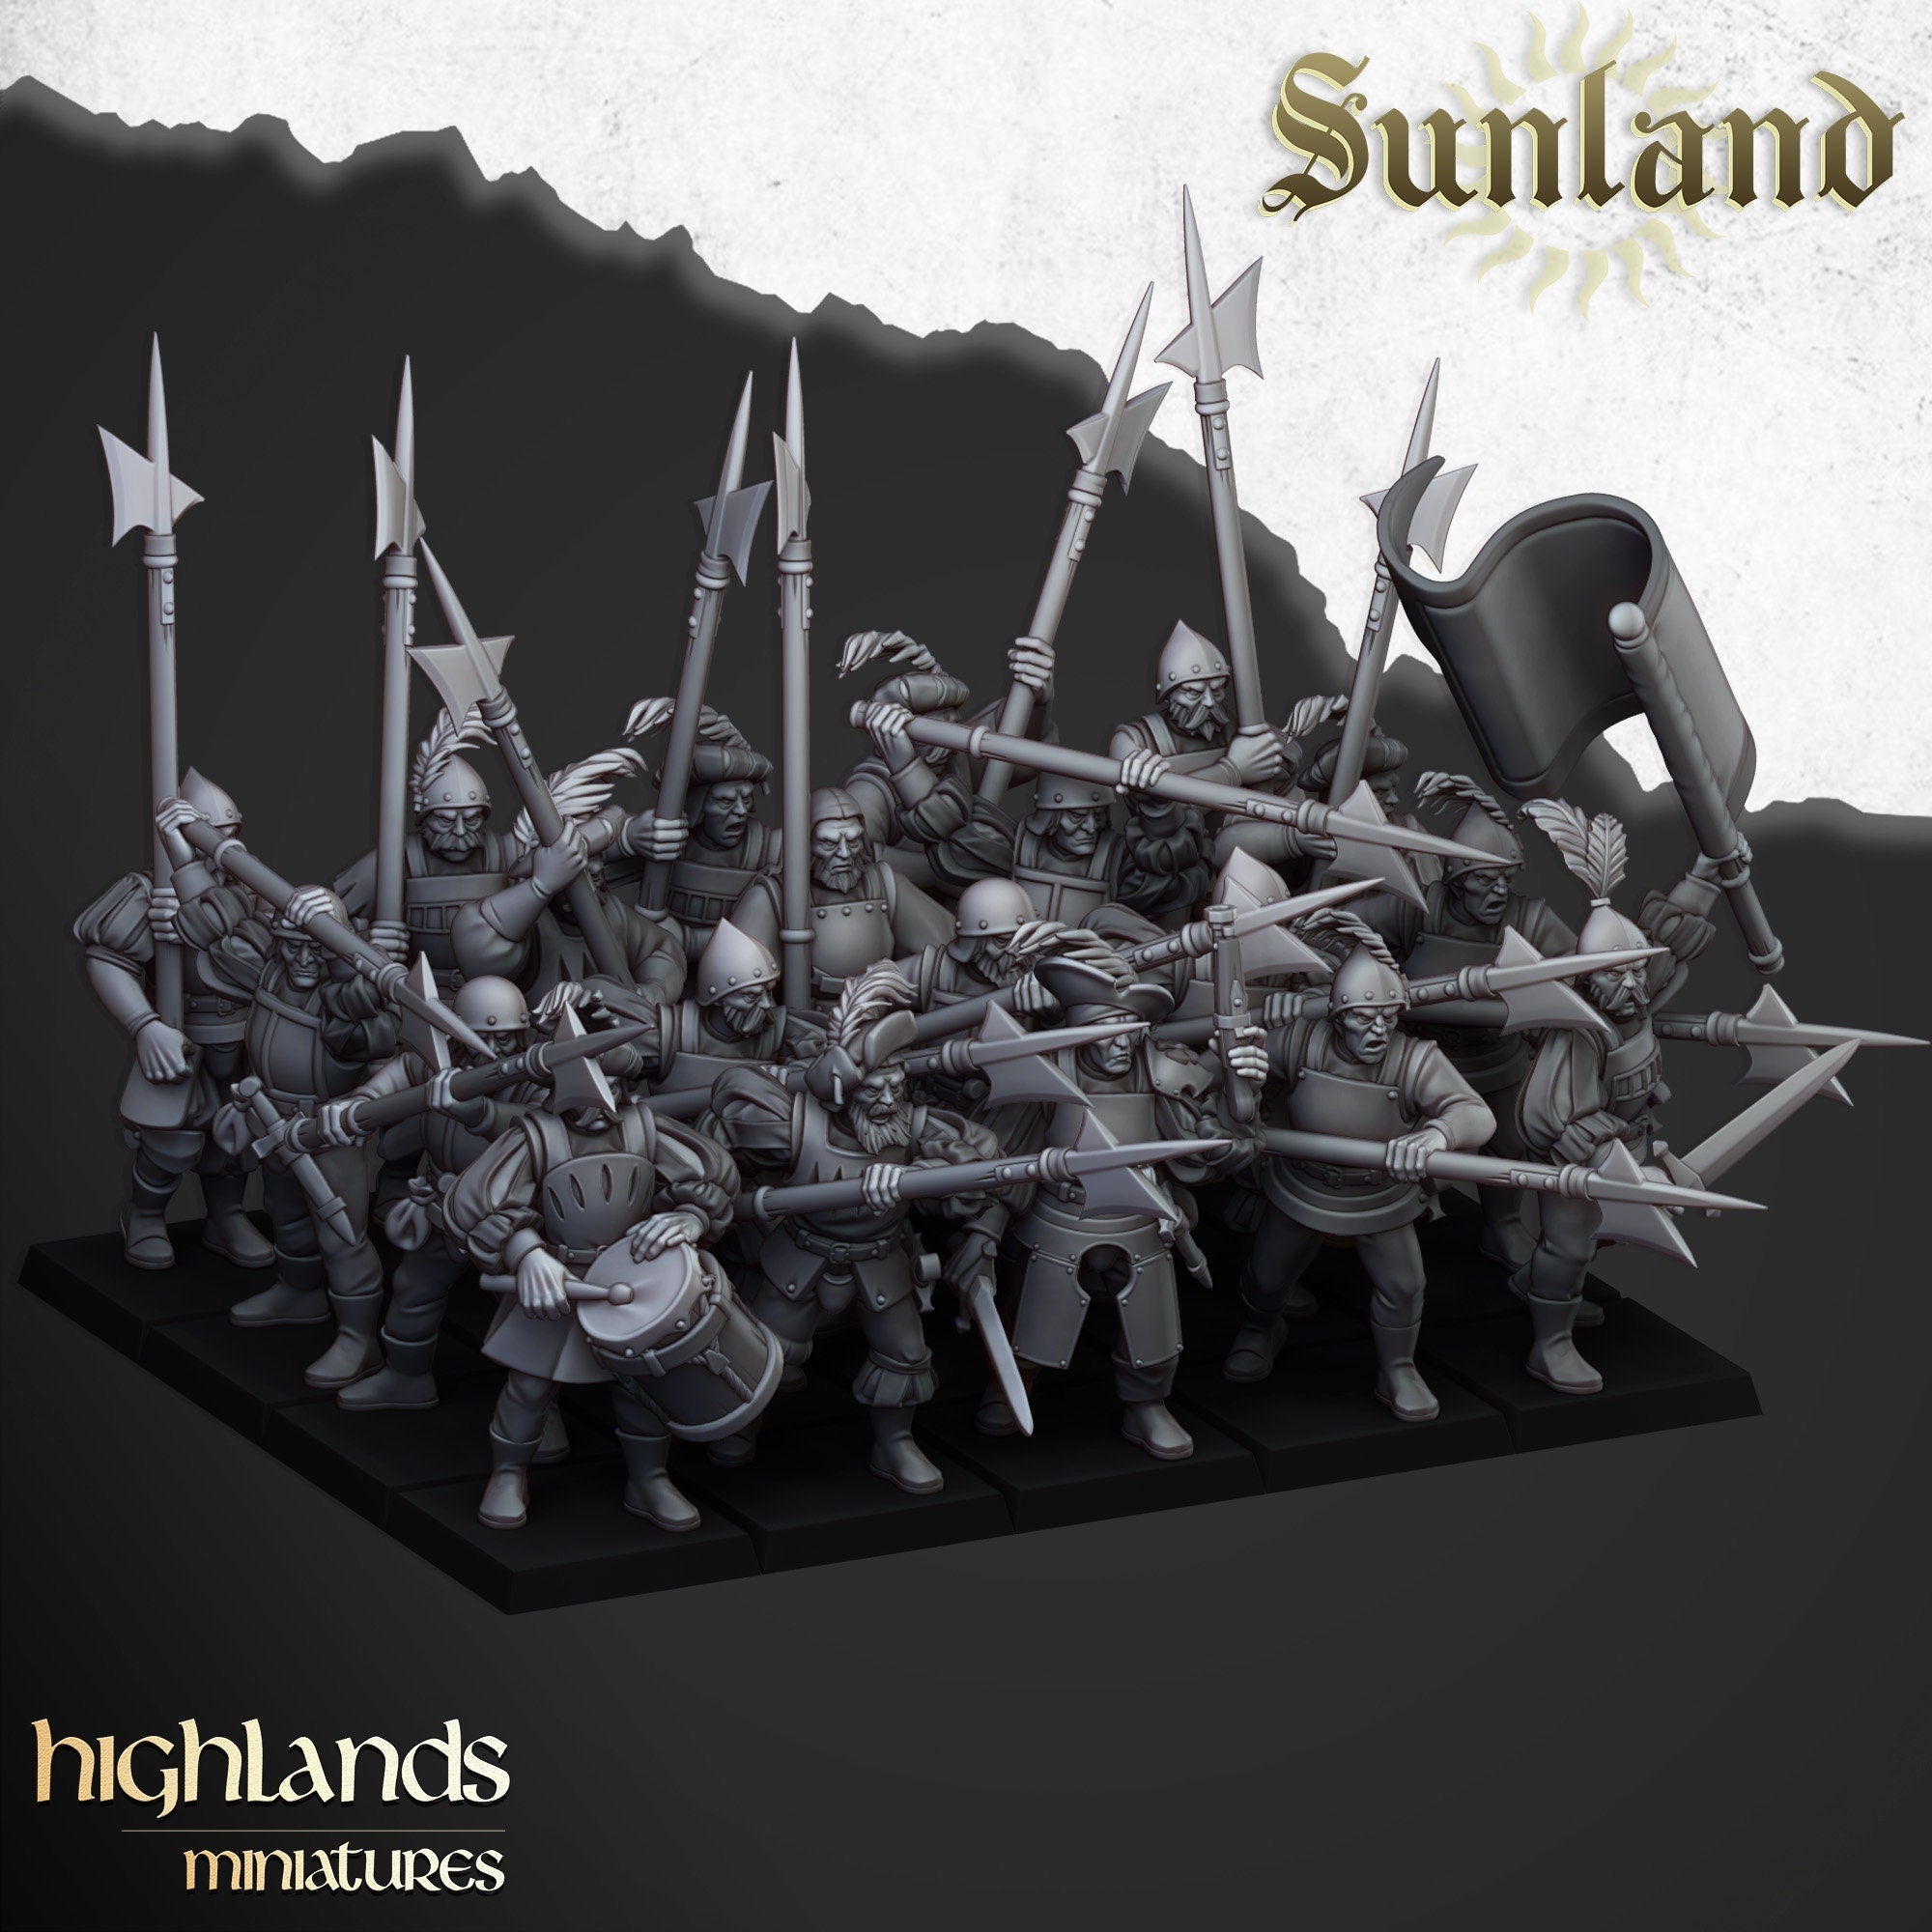 Sunland Troops Unit By Highlands Miniatures